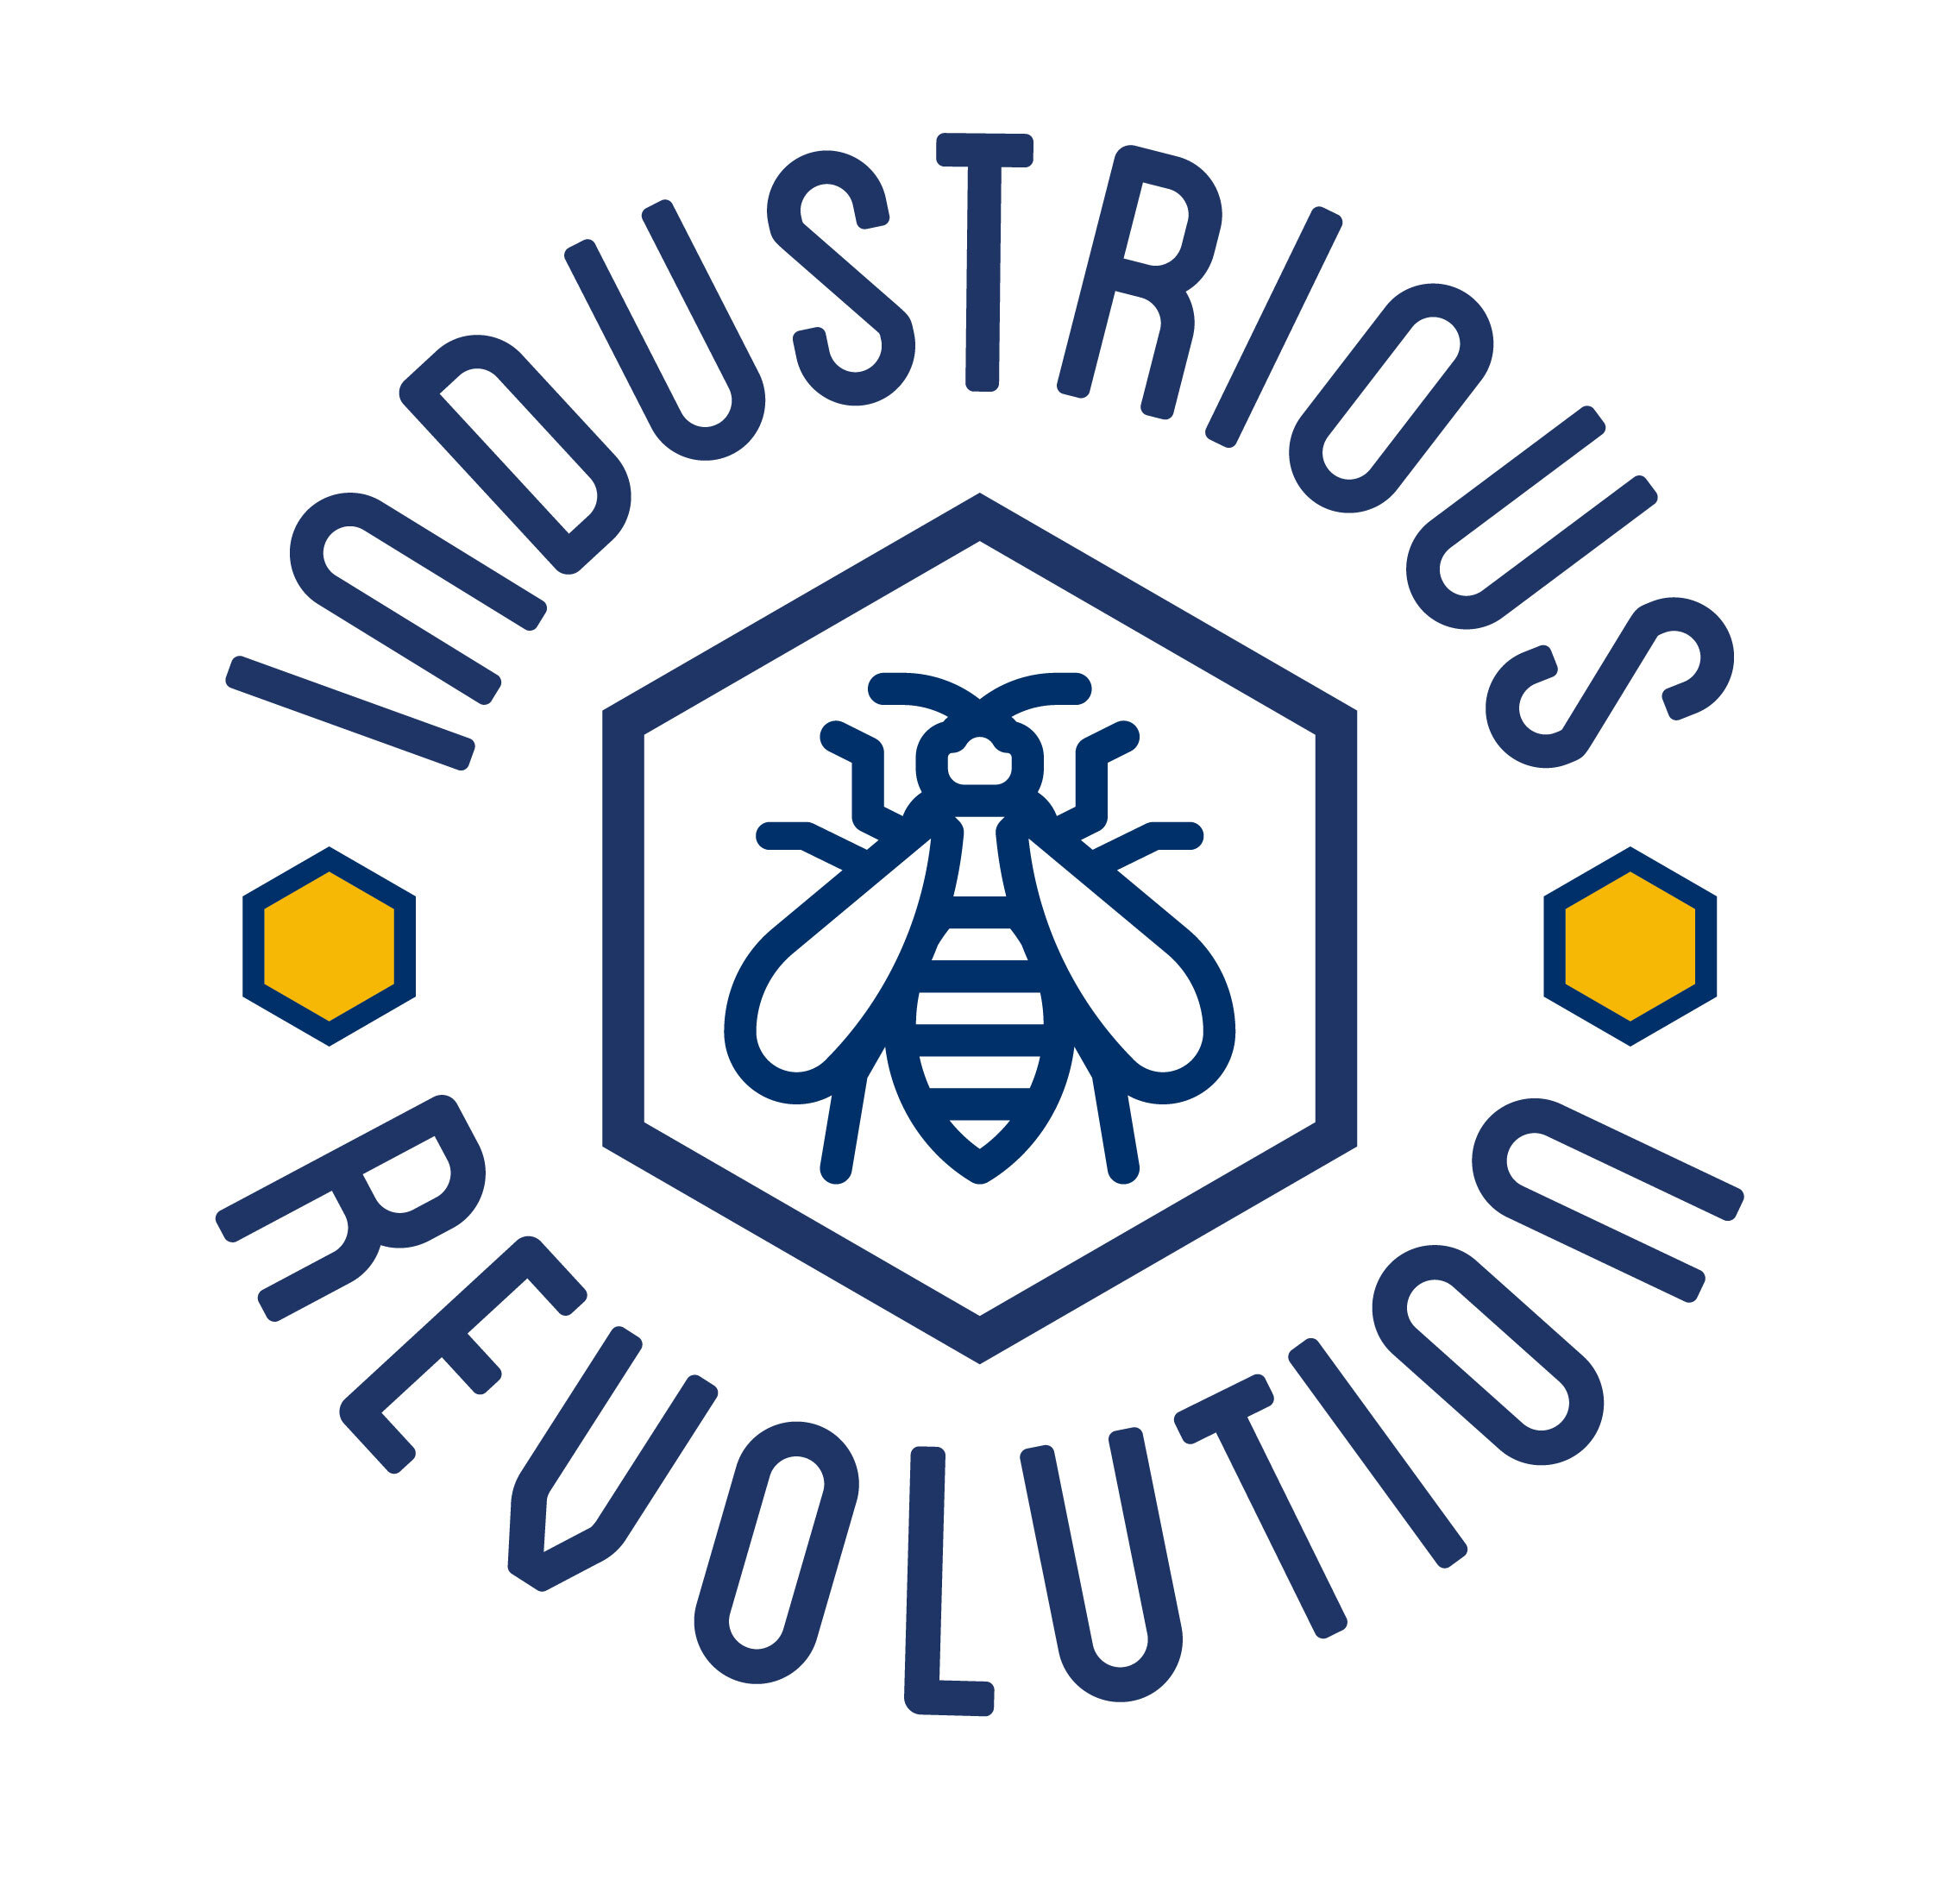  The Industrious Revolution logo was created for urban beekeepers out of Lowell, MA. With a background in manufacturing, they were interested in both designing new tools for beekeepers and selling products from their backyard honey production. The lo